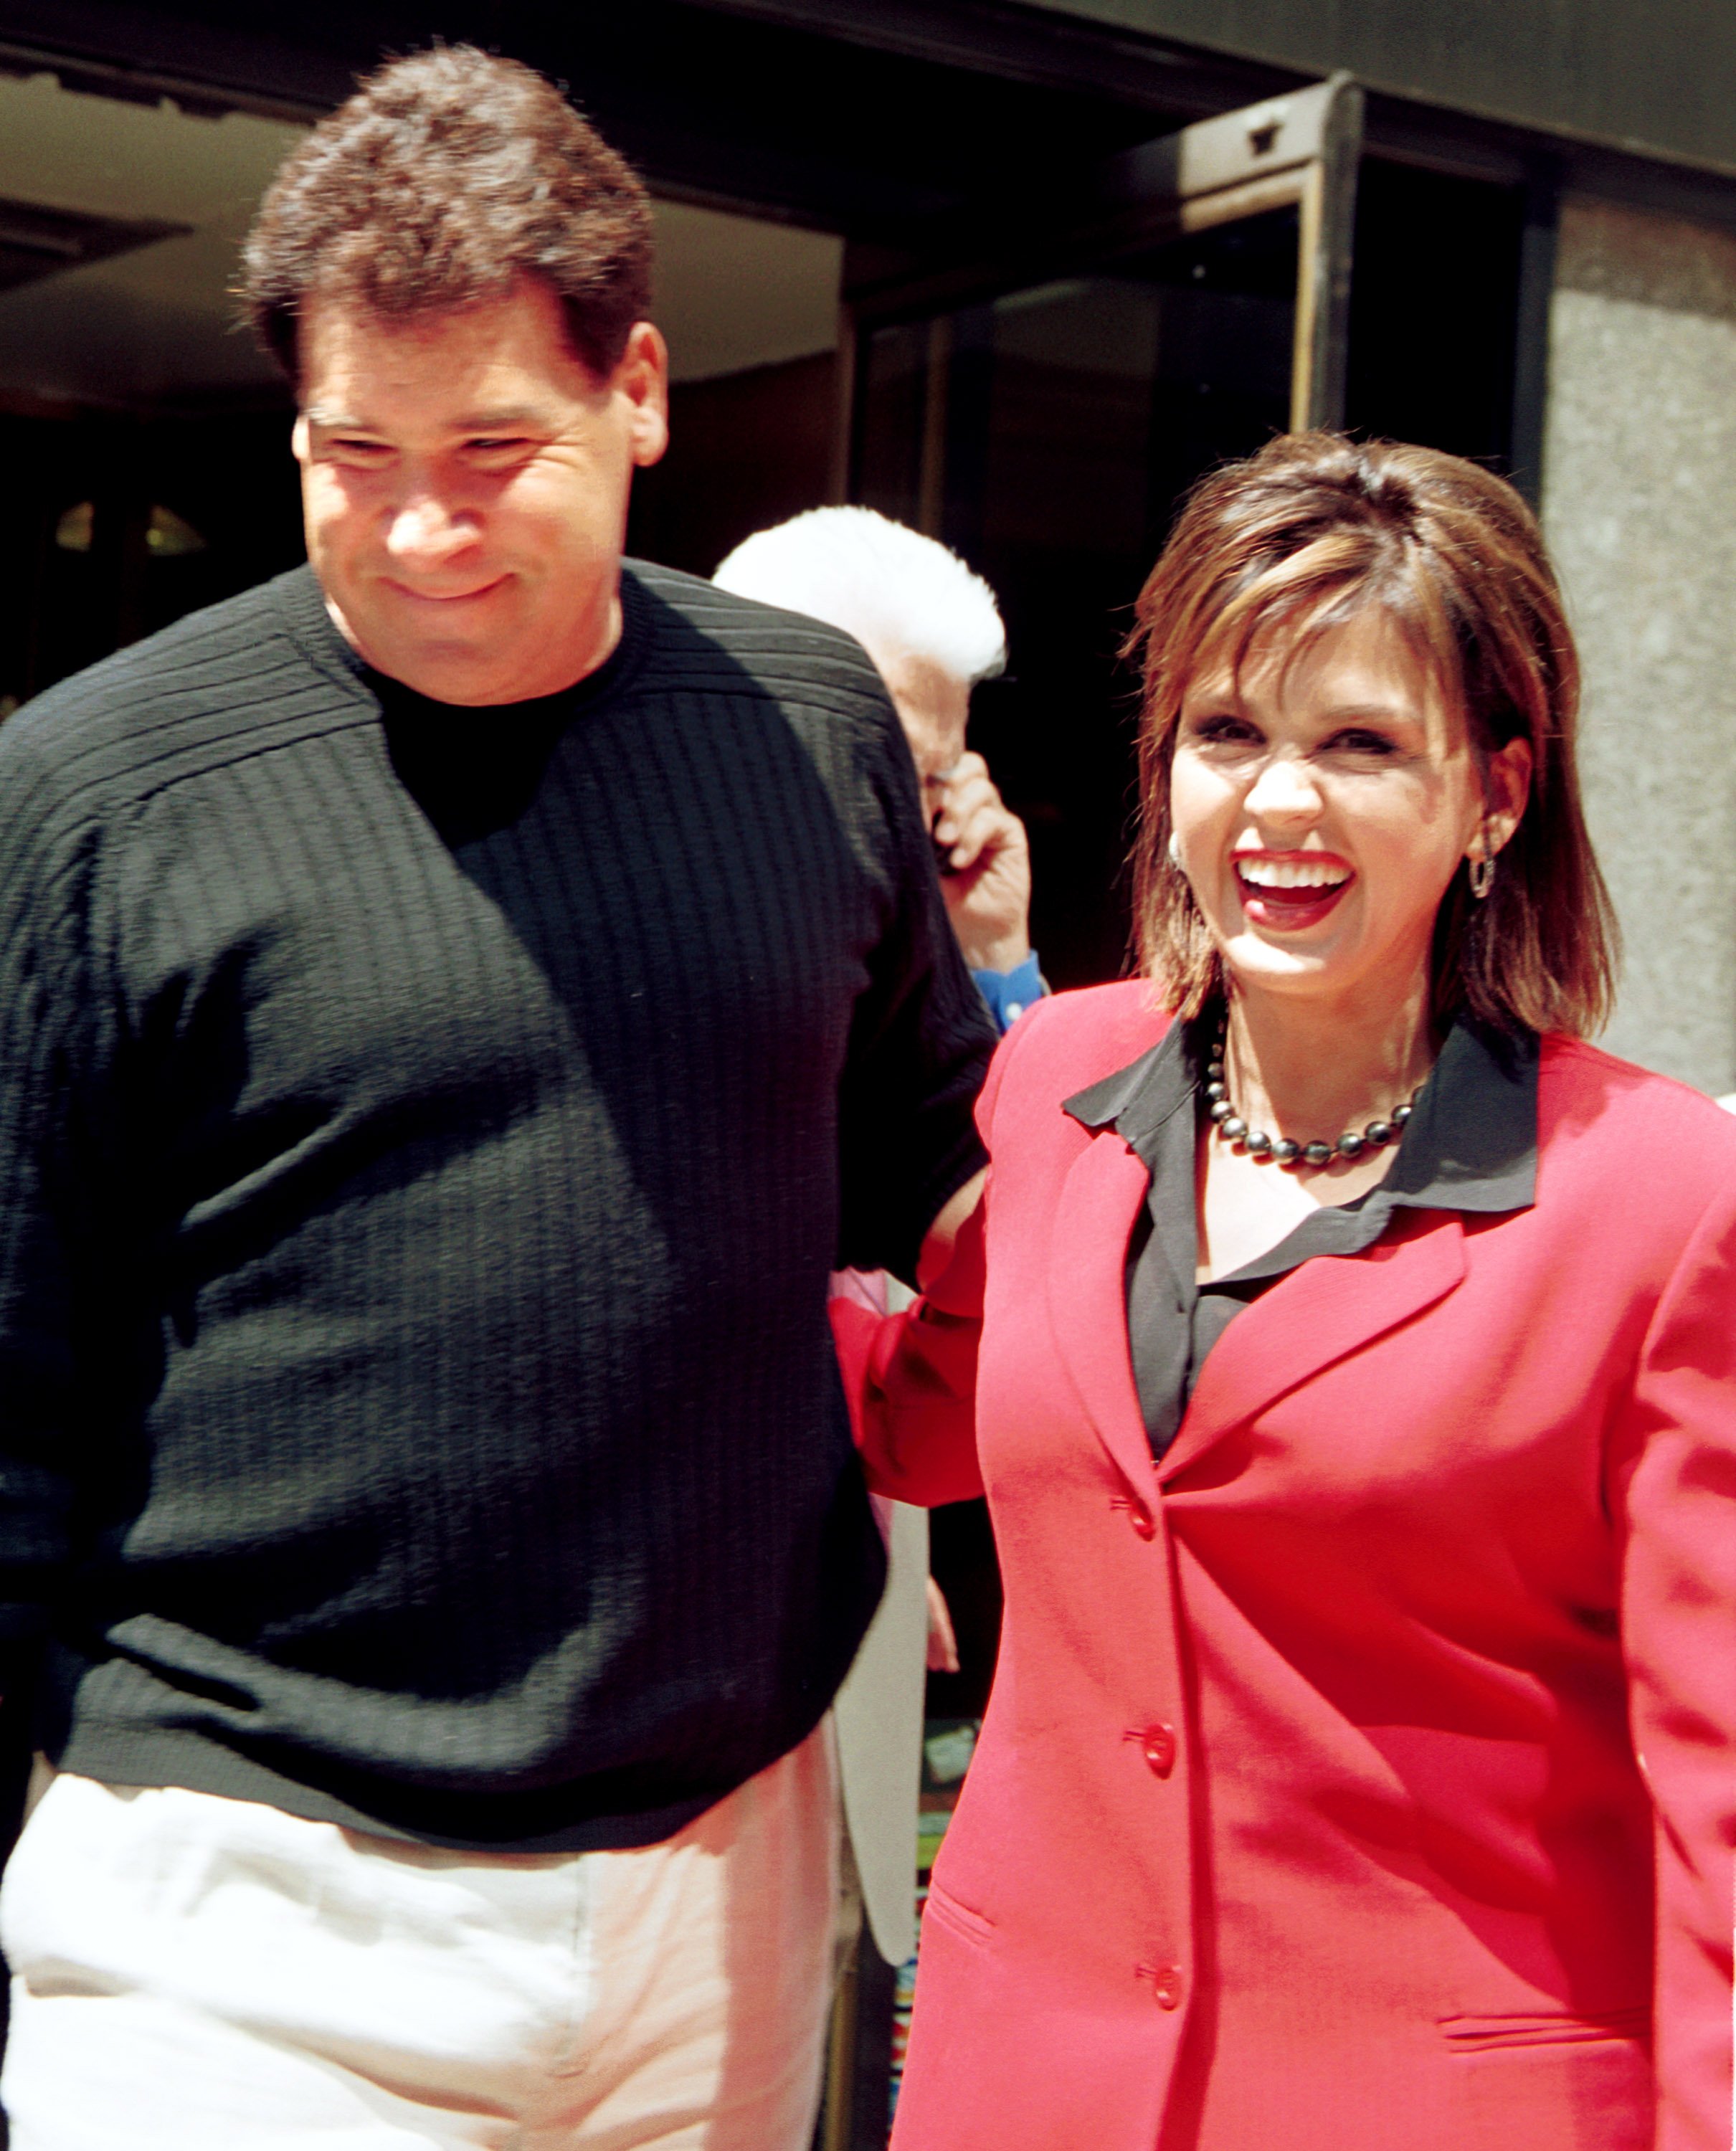 Brian Blosil and Marie Osmond leave a book signing for her new book "Behind the Smile" on May 1, 2001, in New York City | Source: Getty Images